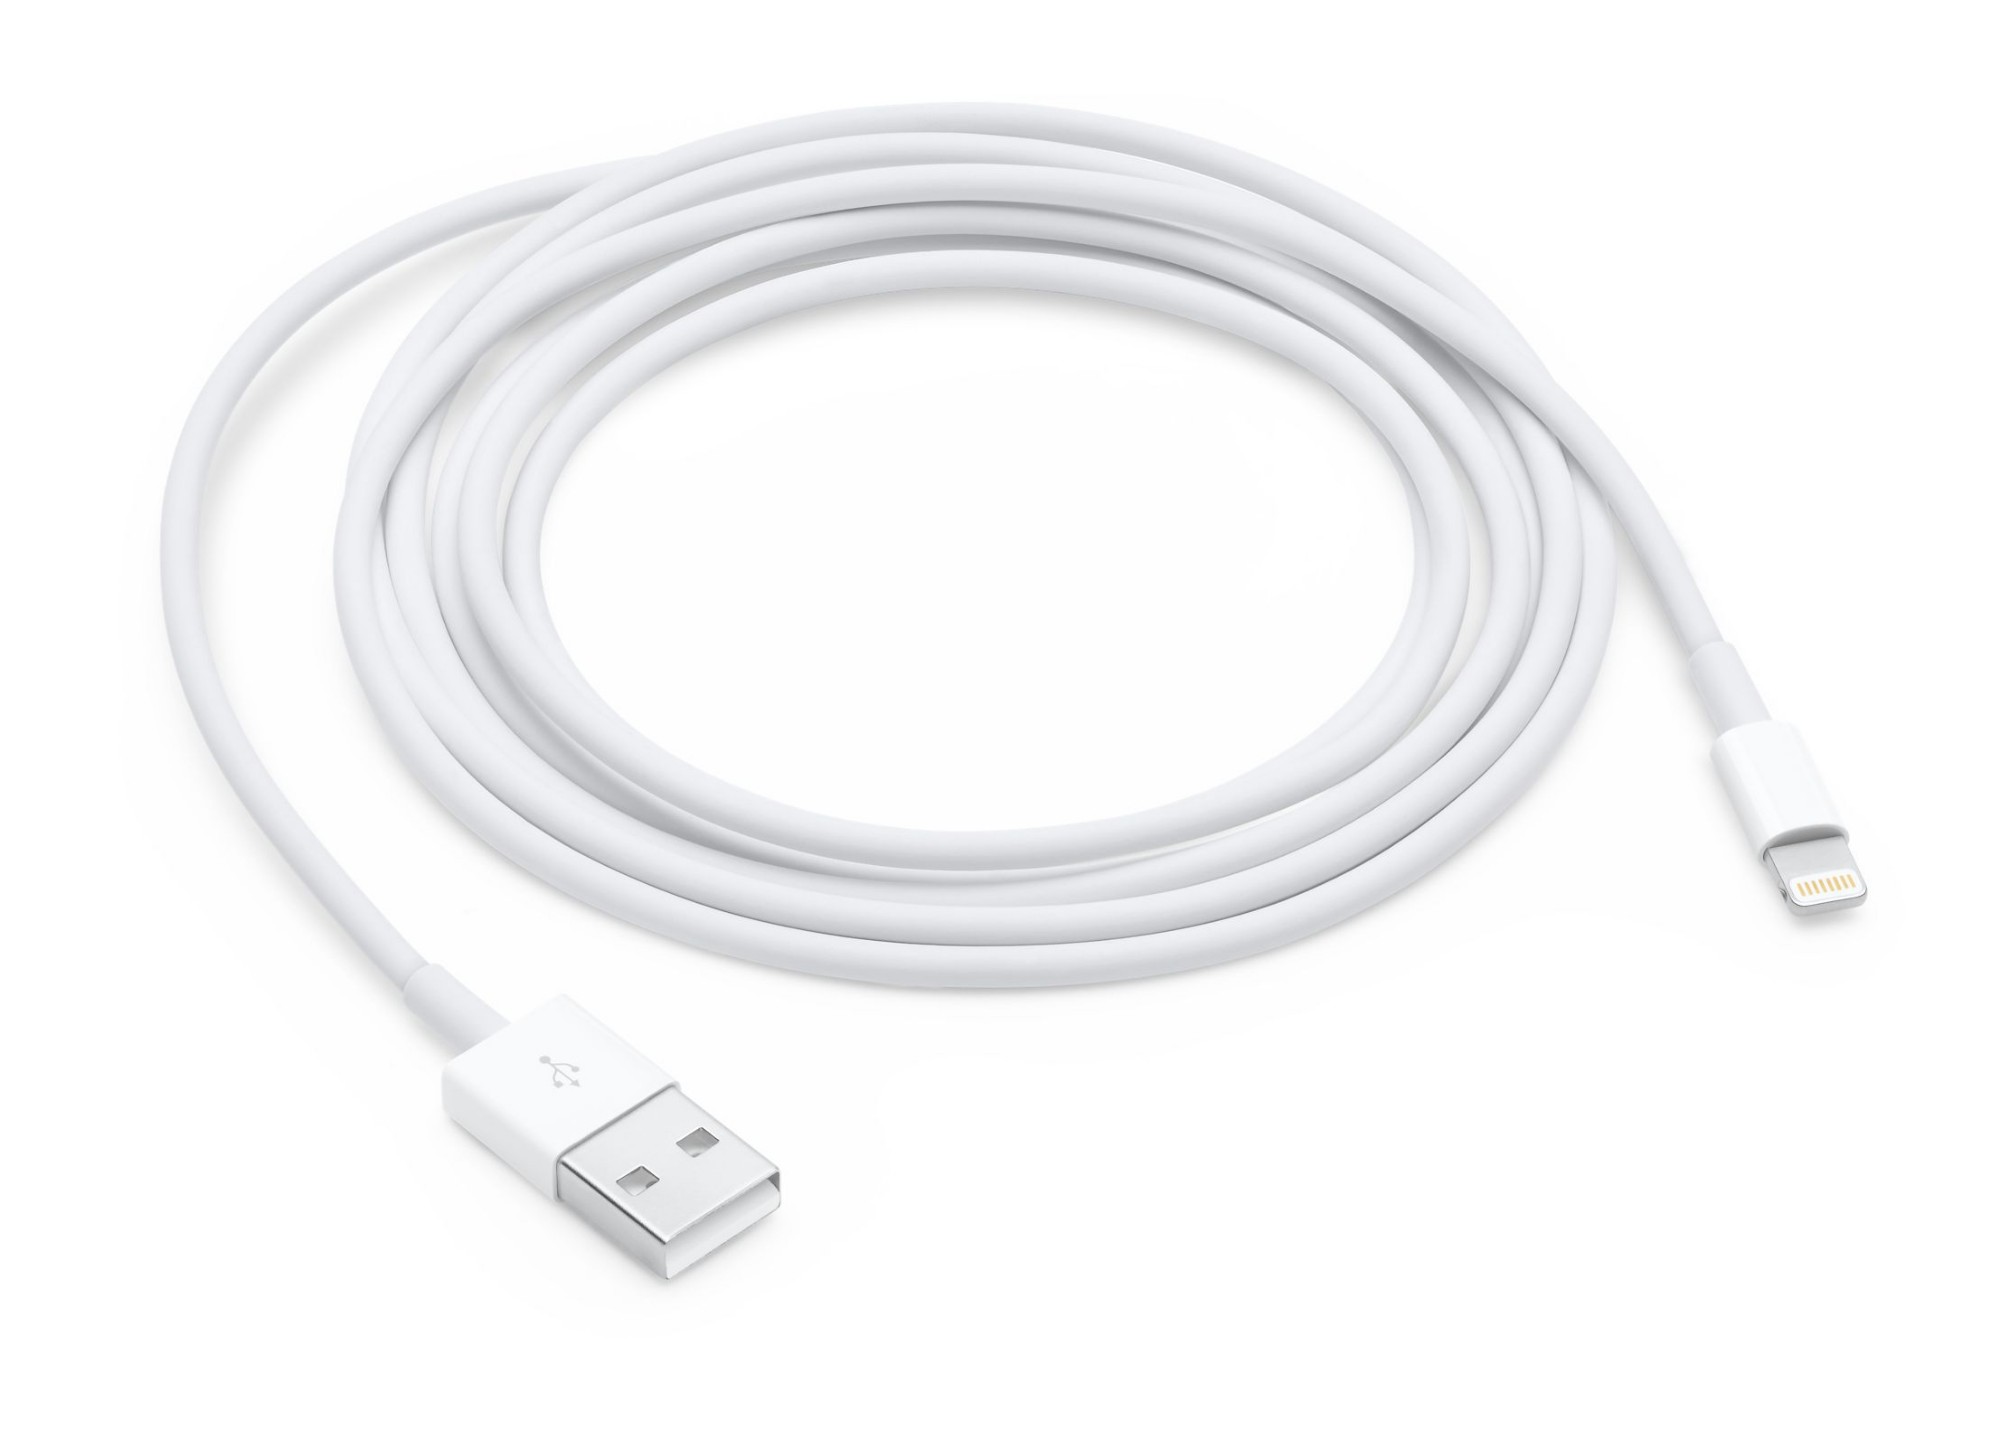 Photos - Cable (video, audio, USB) Apple Lightning to USB Cable  MD819ZM/A (2 m)